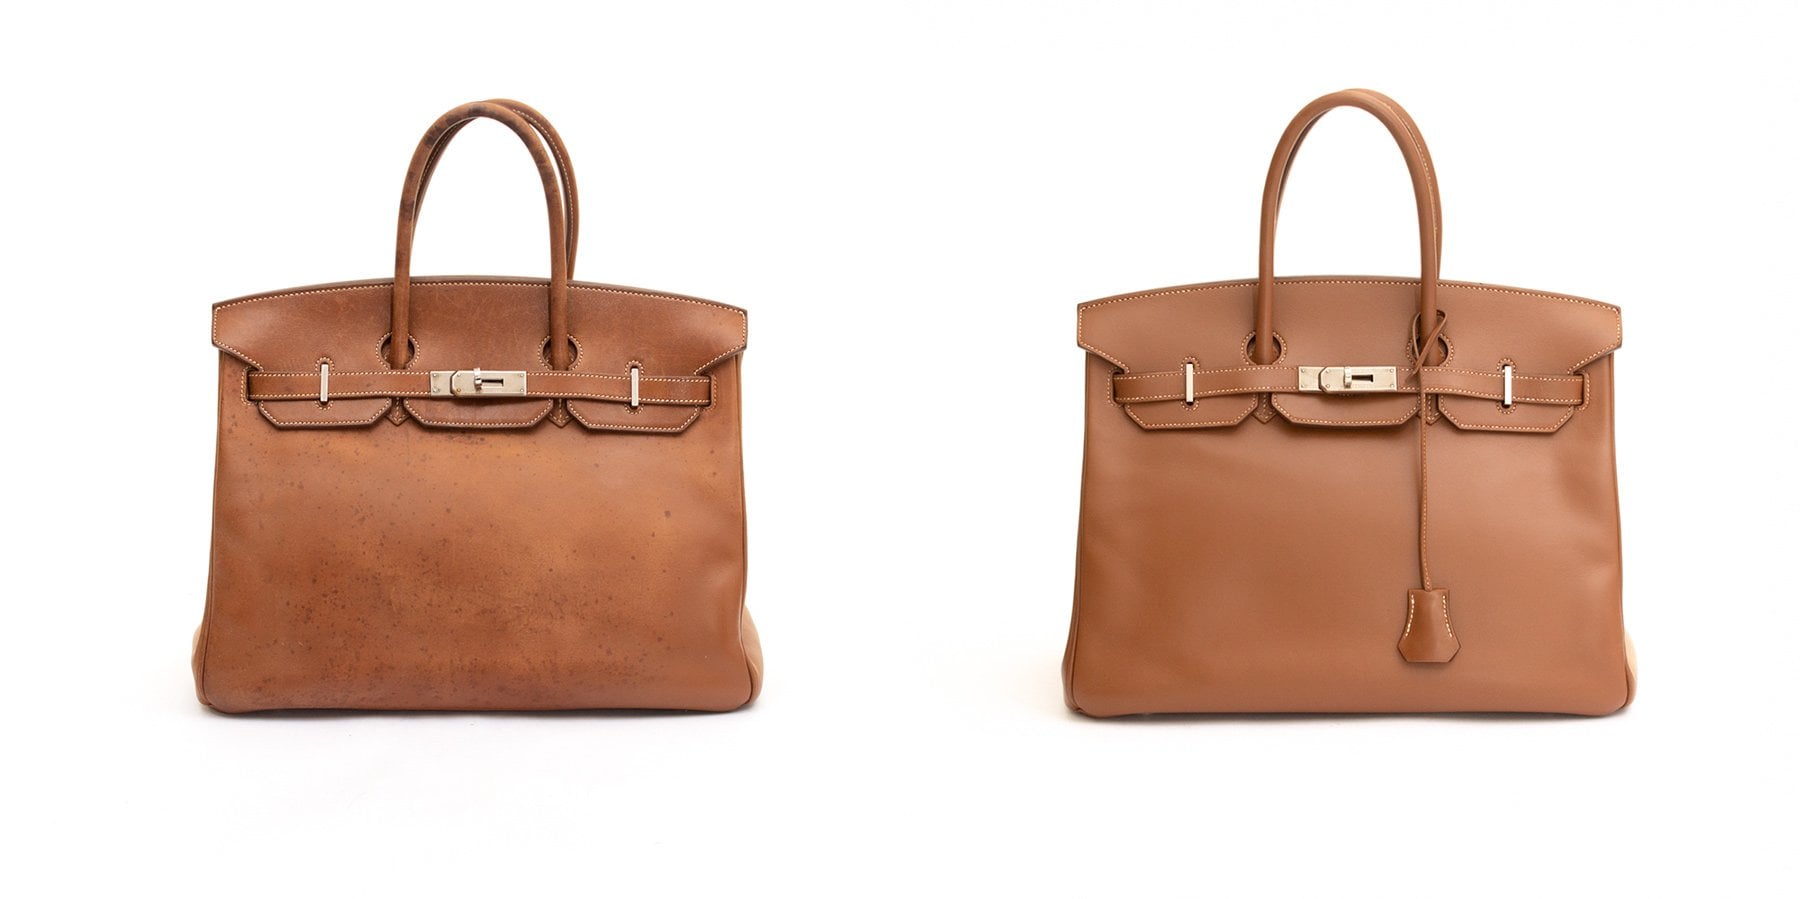 Why The Evelyn Should Be Your First Hermes Handbag